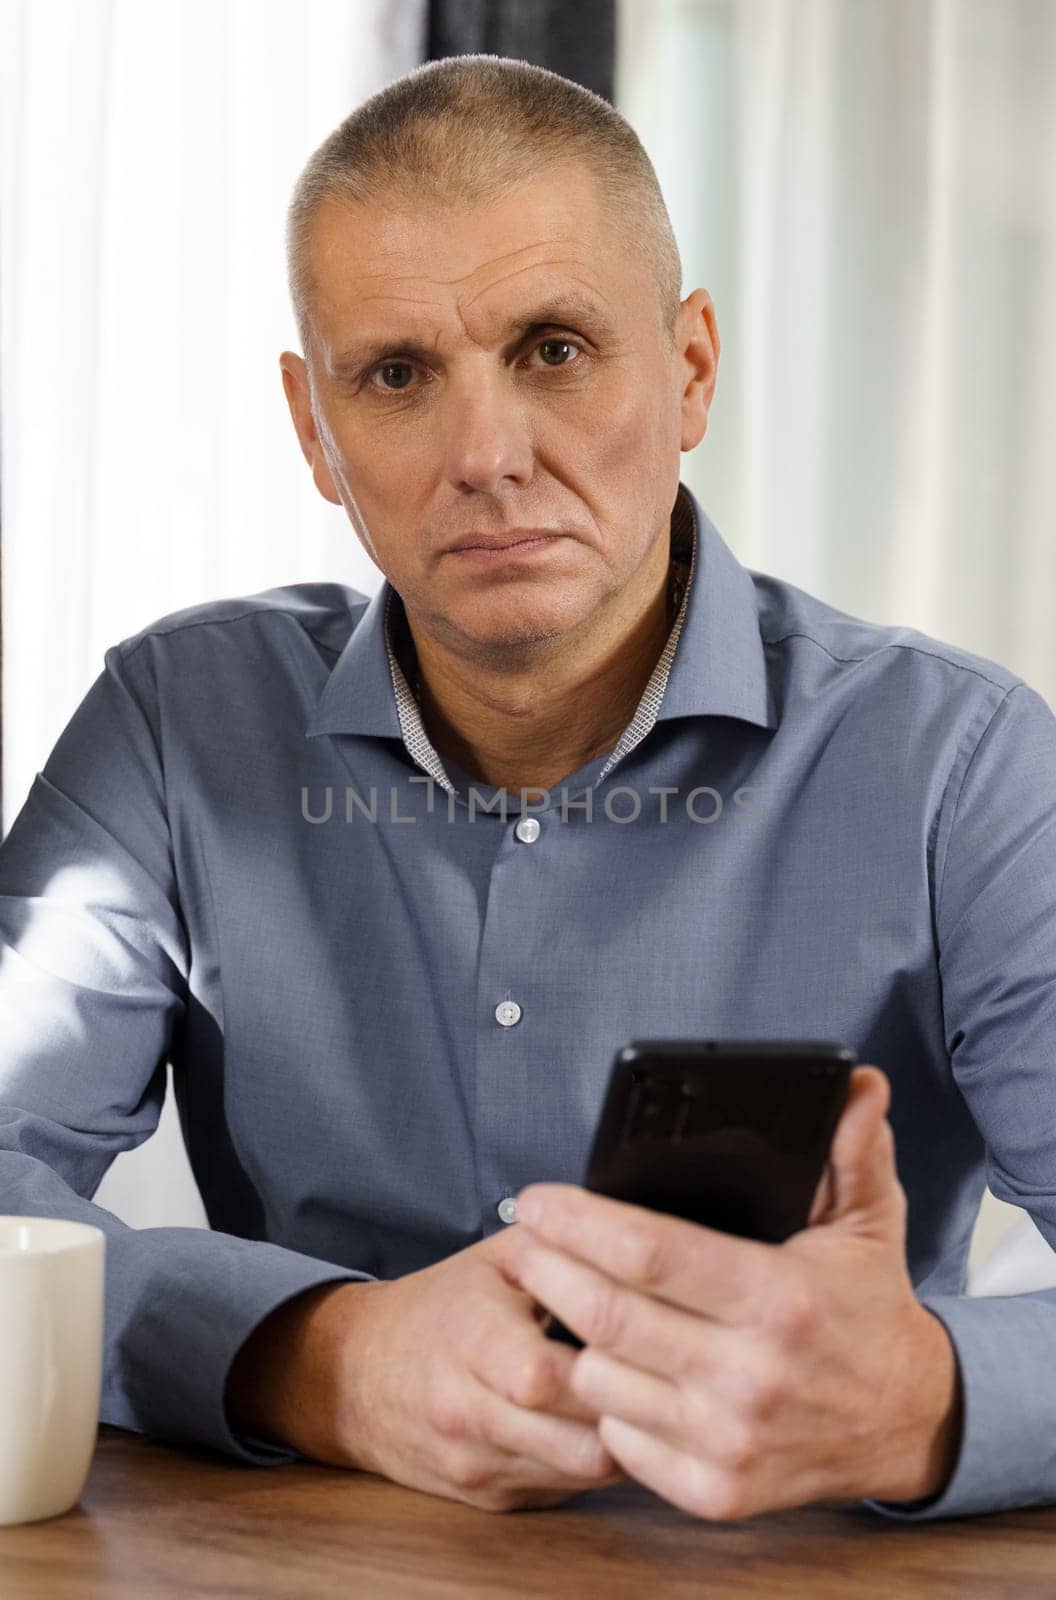 Portrait of a male businessman who sits at a table, holds a phone in his hands, looks into the camera. Vertical frame.